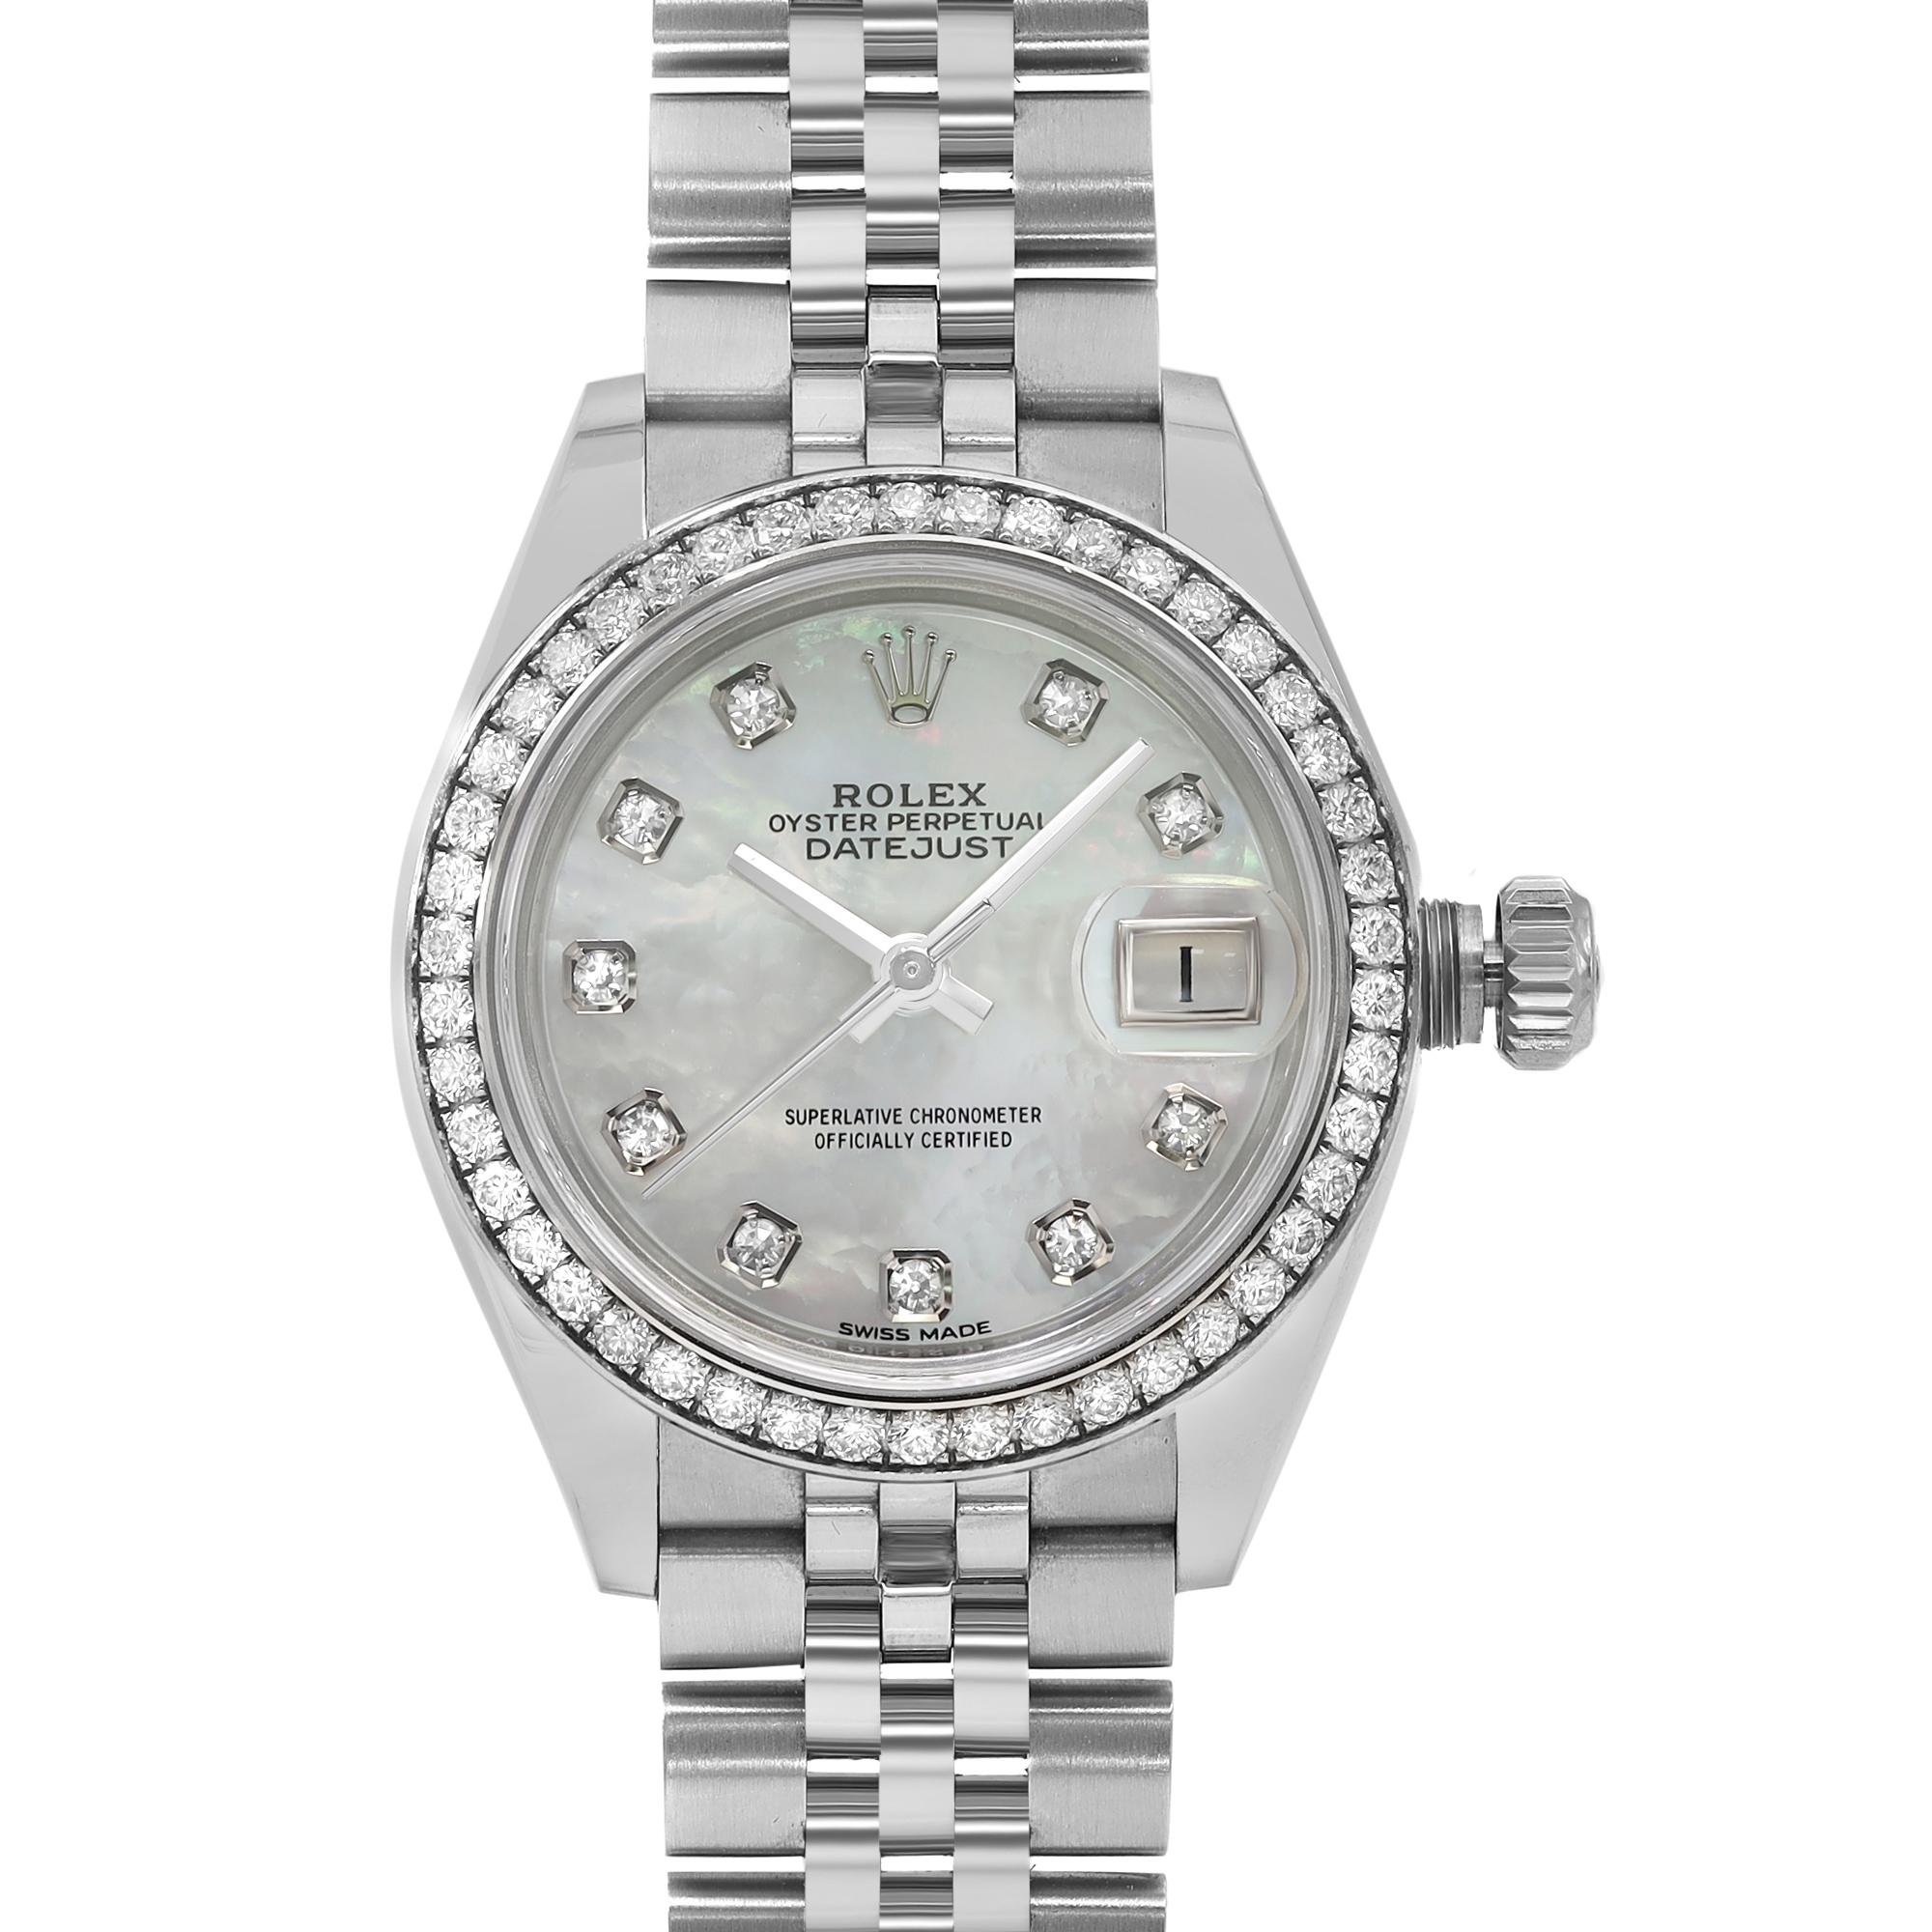 Pre-owned Rolex Datejust 28mm Steel MOP Diamond Dial Automatic Ladies Watch 279384RBR is a beautiful Ladies timepiece powered by mechanical (automatic) movement cased in a Stainless Steel case. It has a round shape face, Diamond Bezel, Mother of